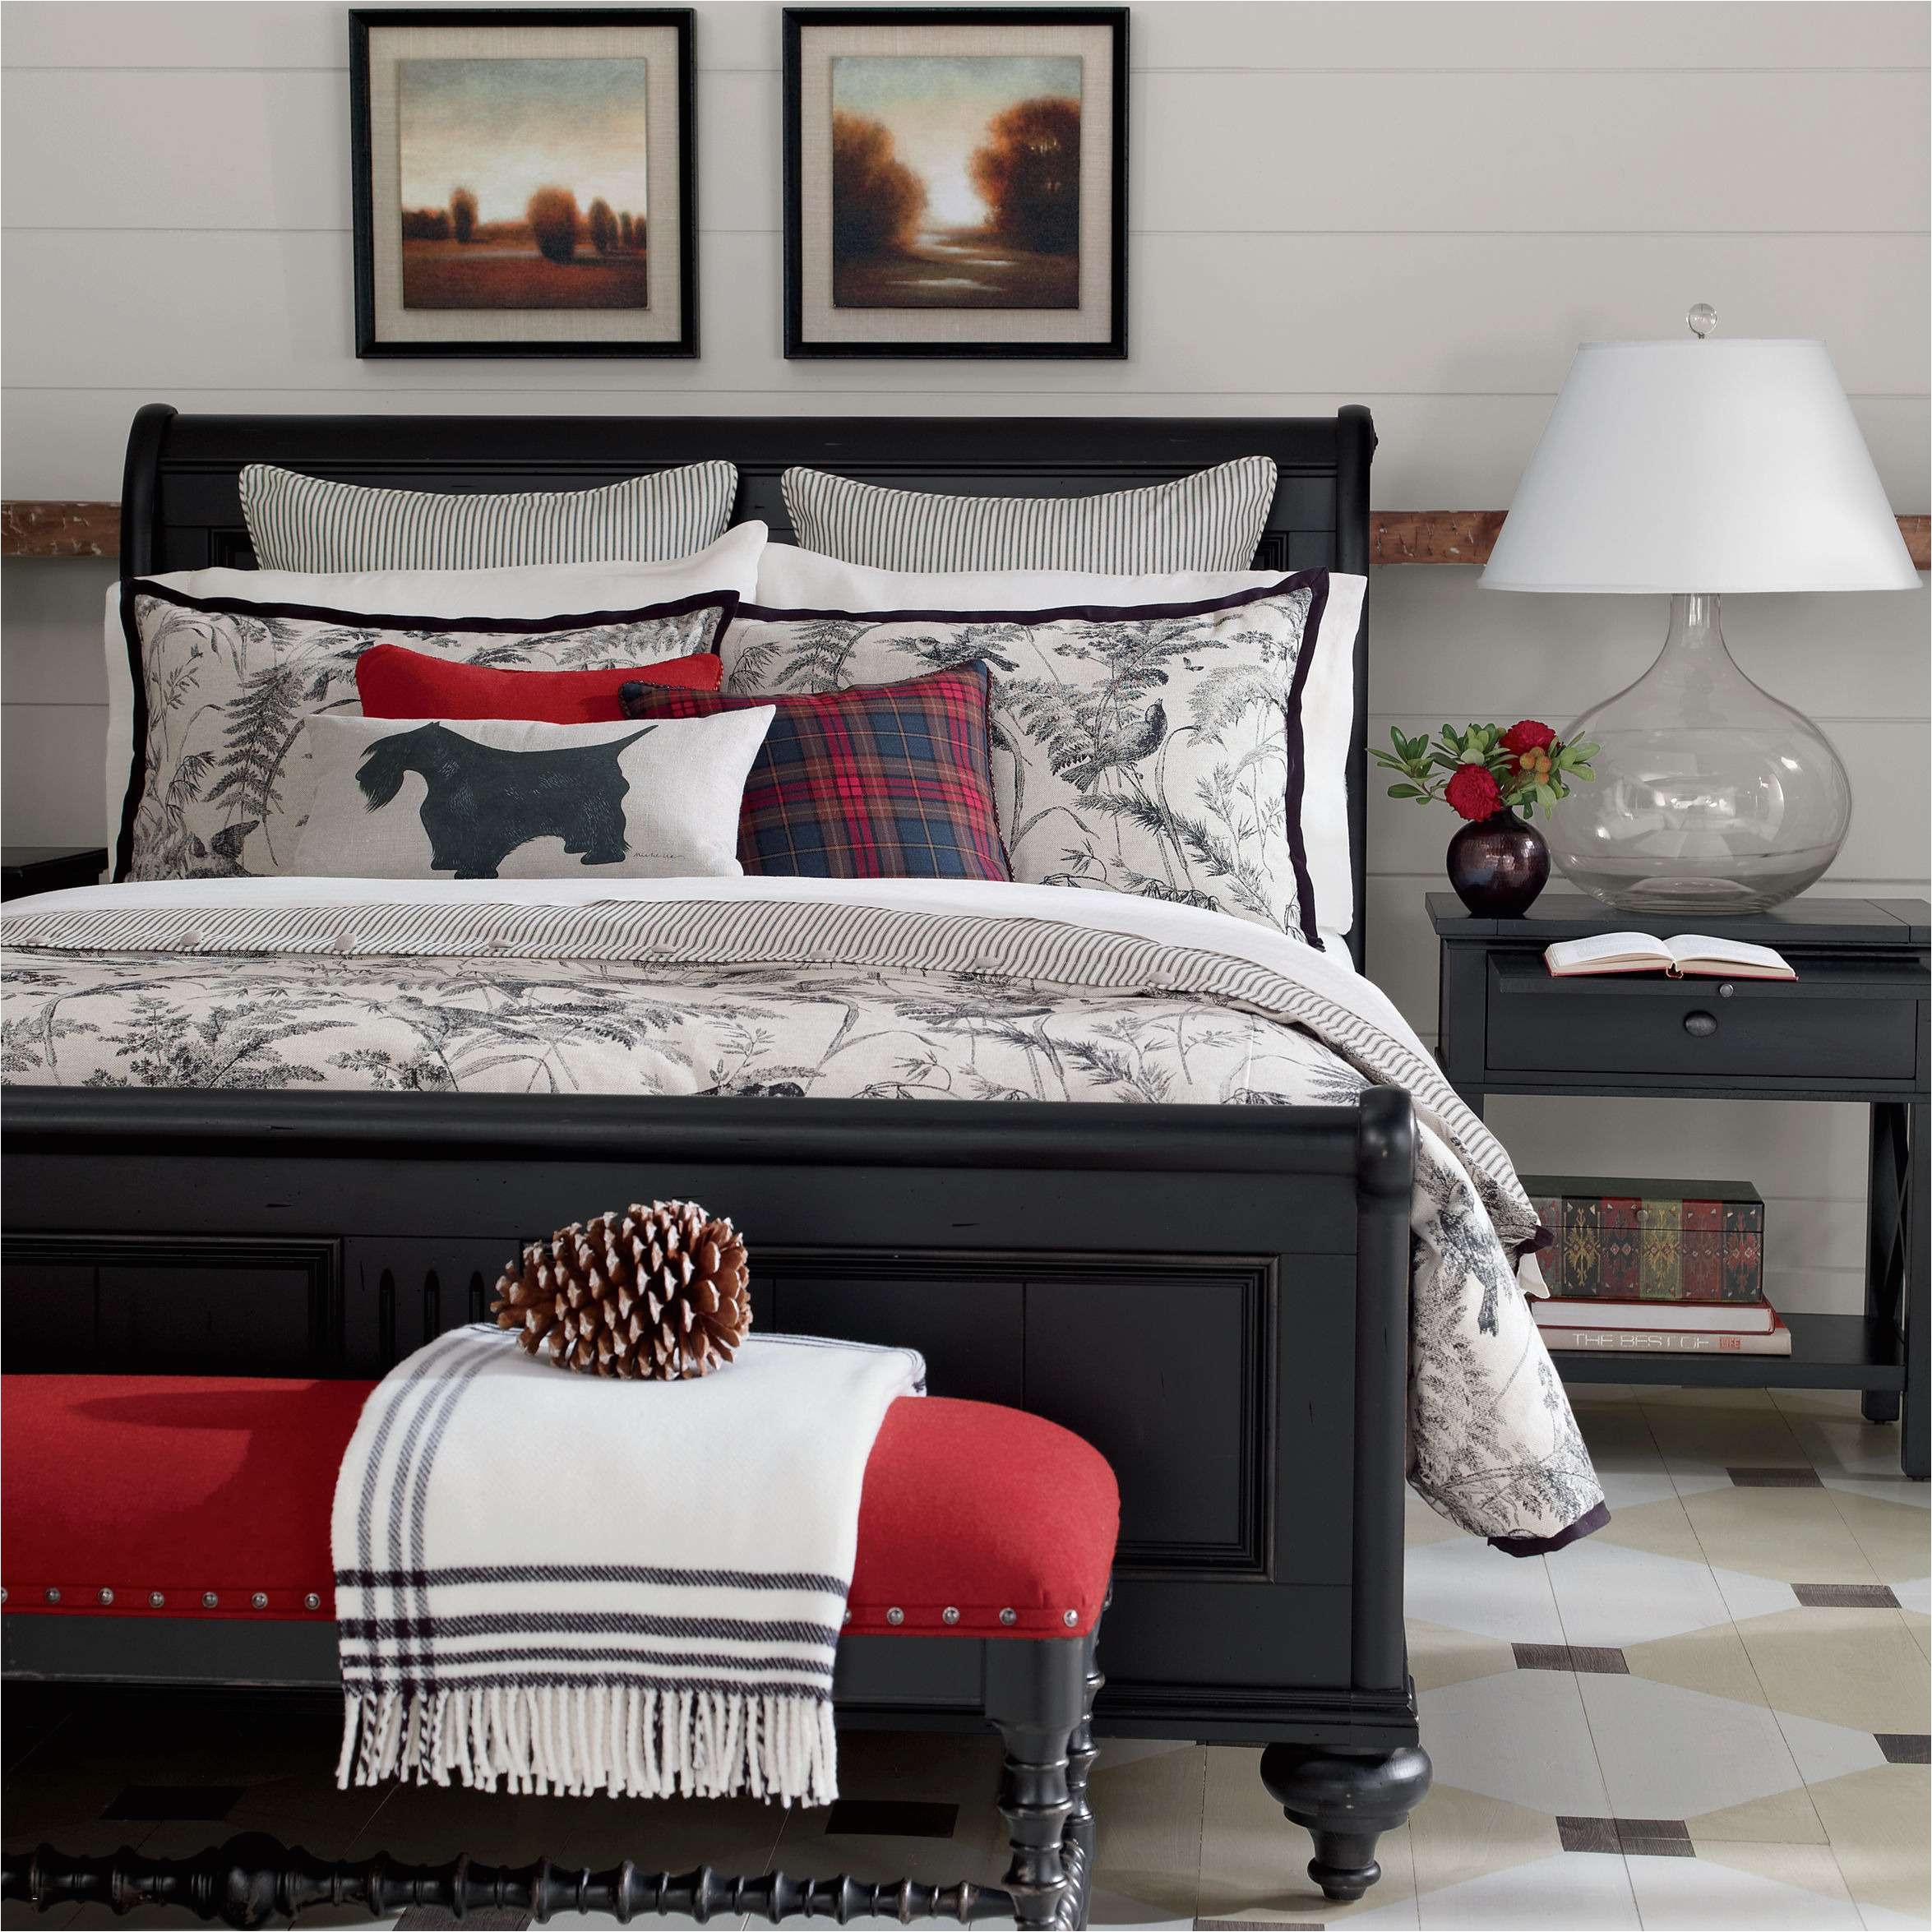 Discontinued Ethan Allen Bedroom Collections 47 Lovely Ethan Allen Bedroom Sets Exitrealestate540